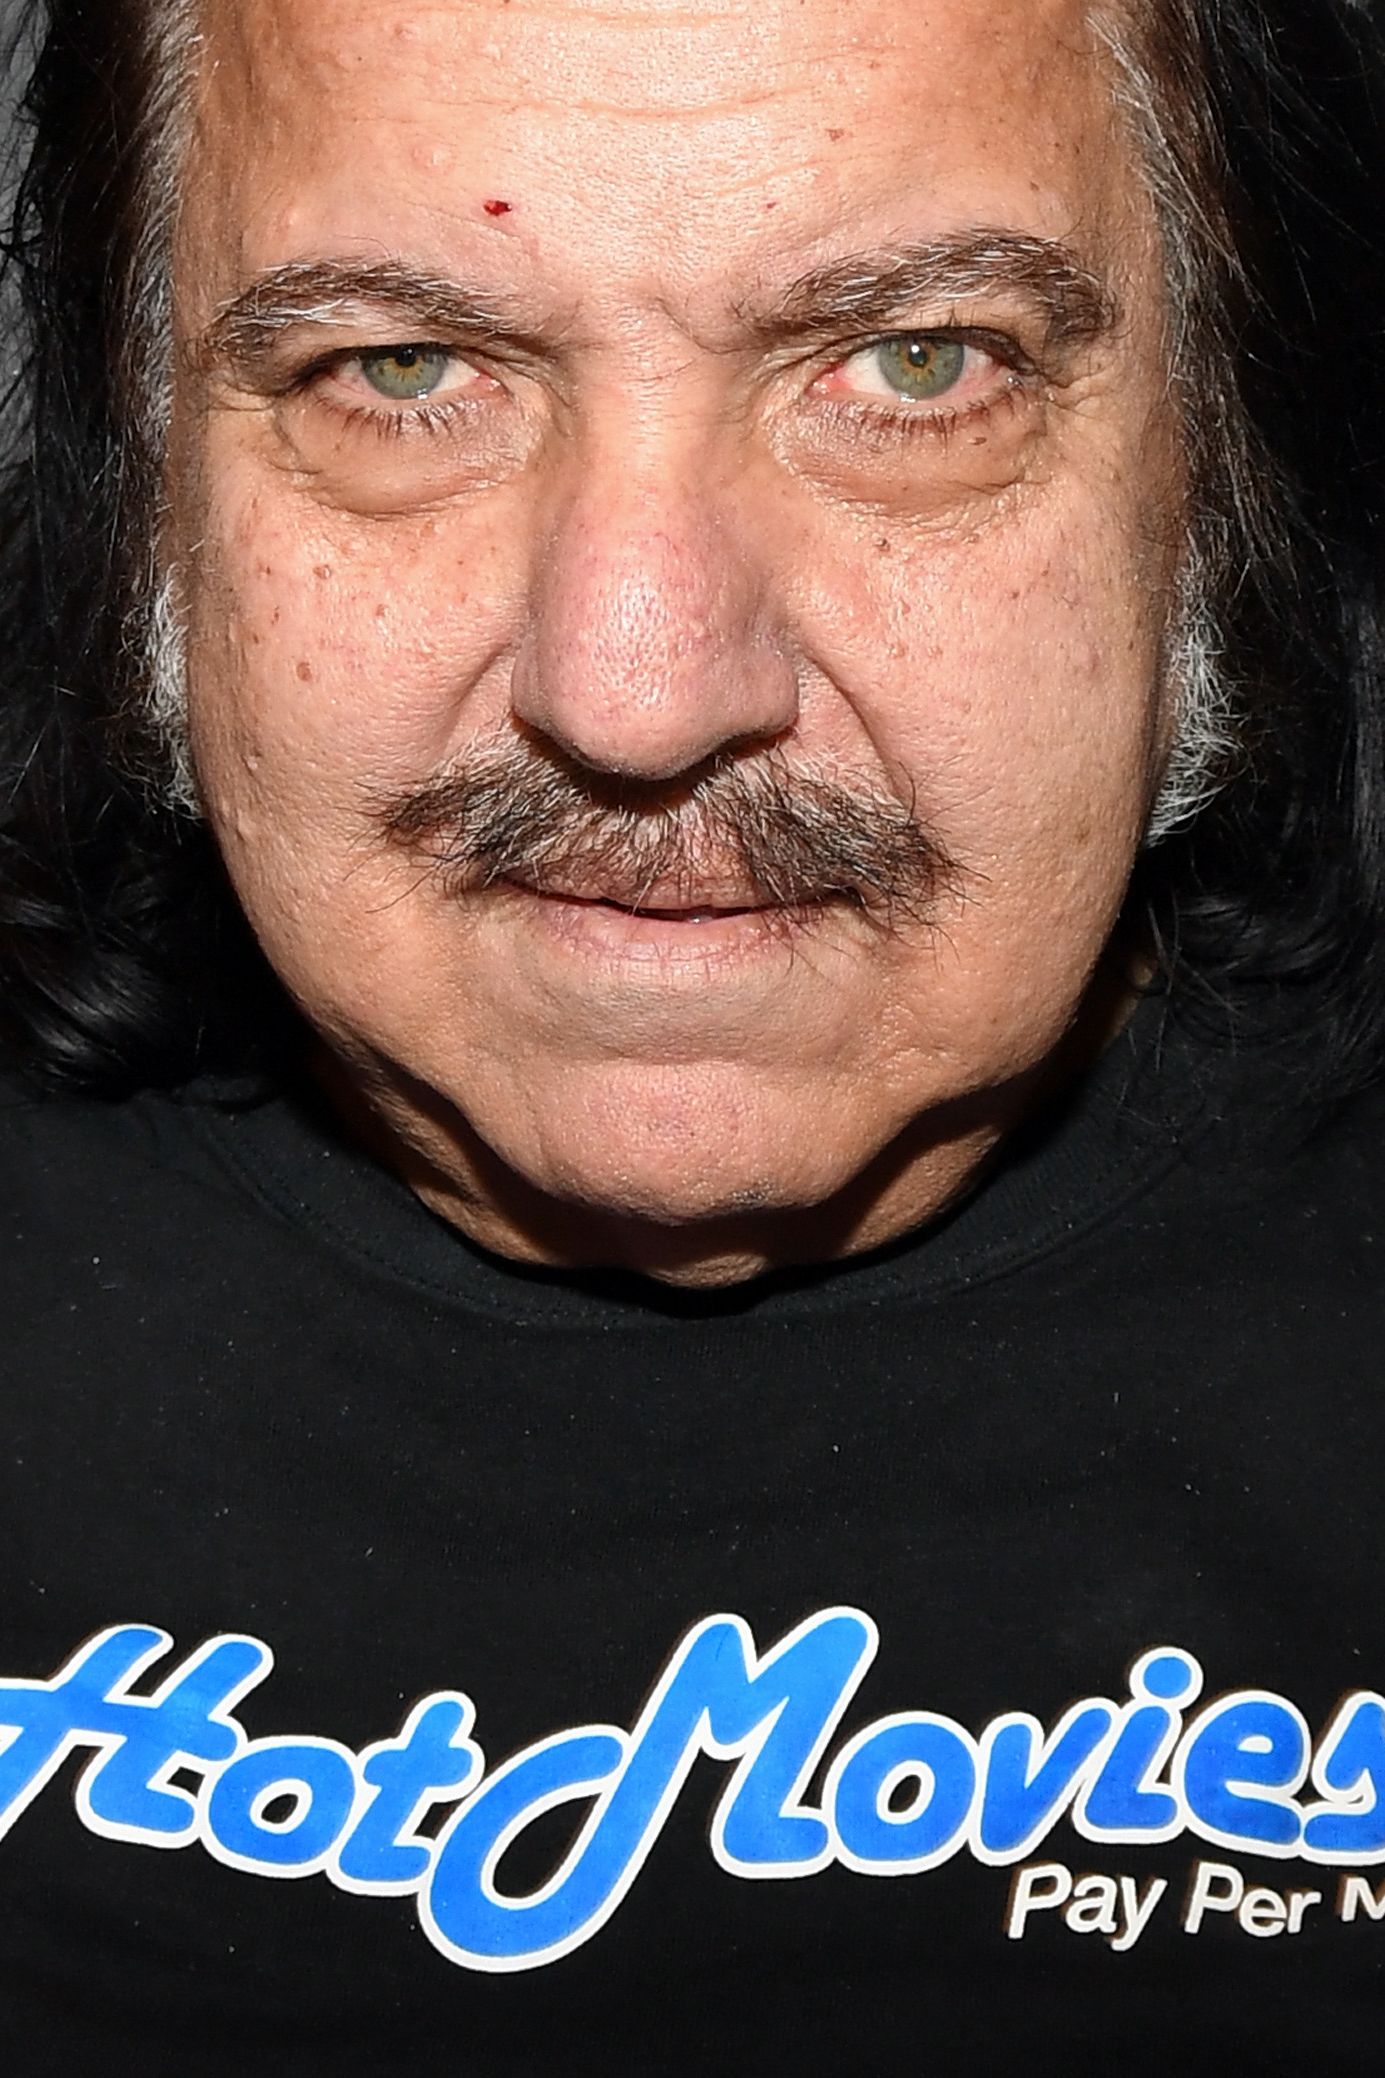 Ron Jeremy, porn star, charged with sexually assaulting four women | CNN